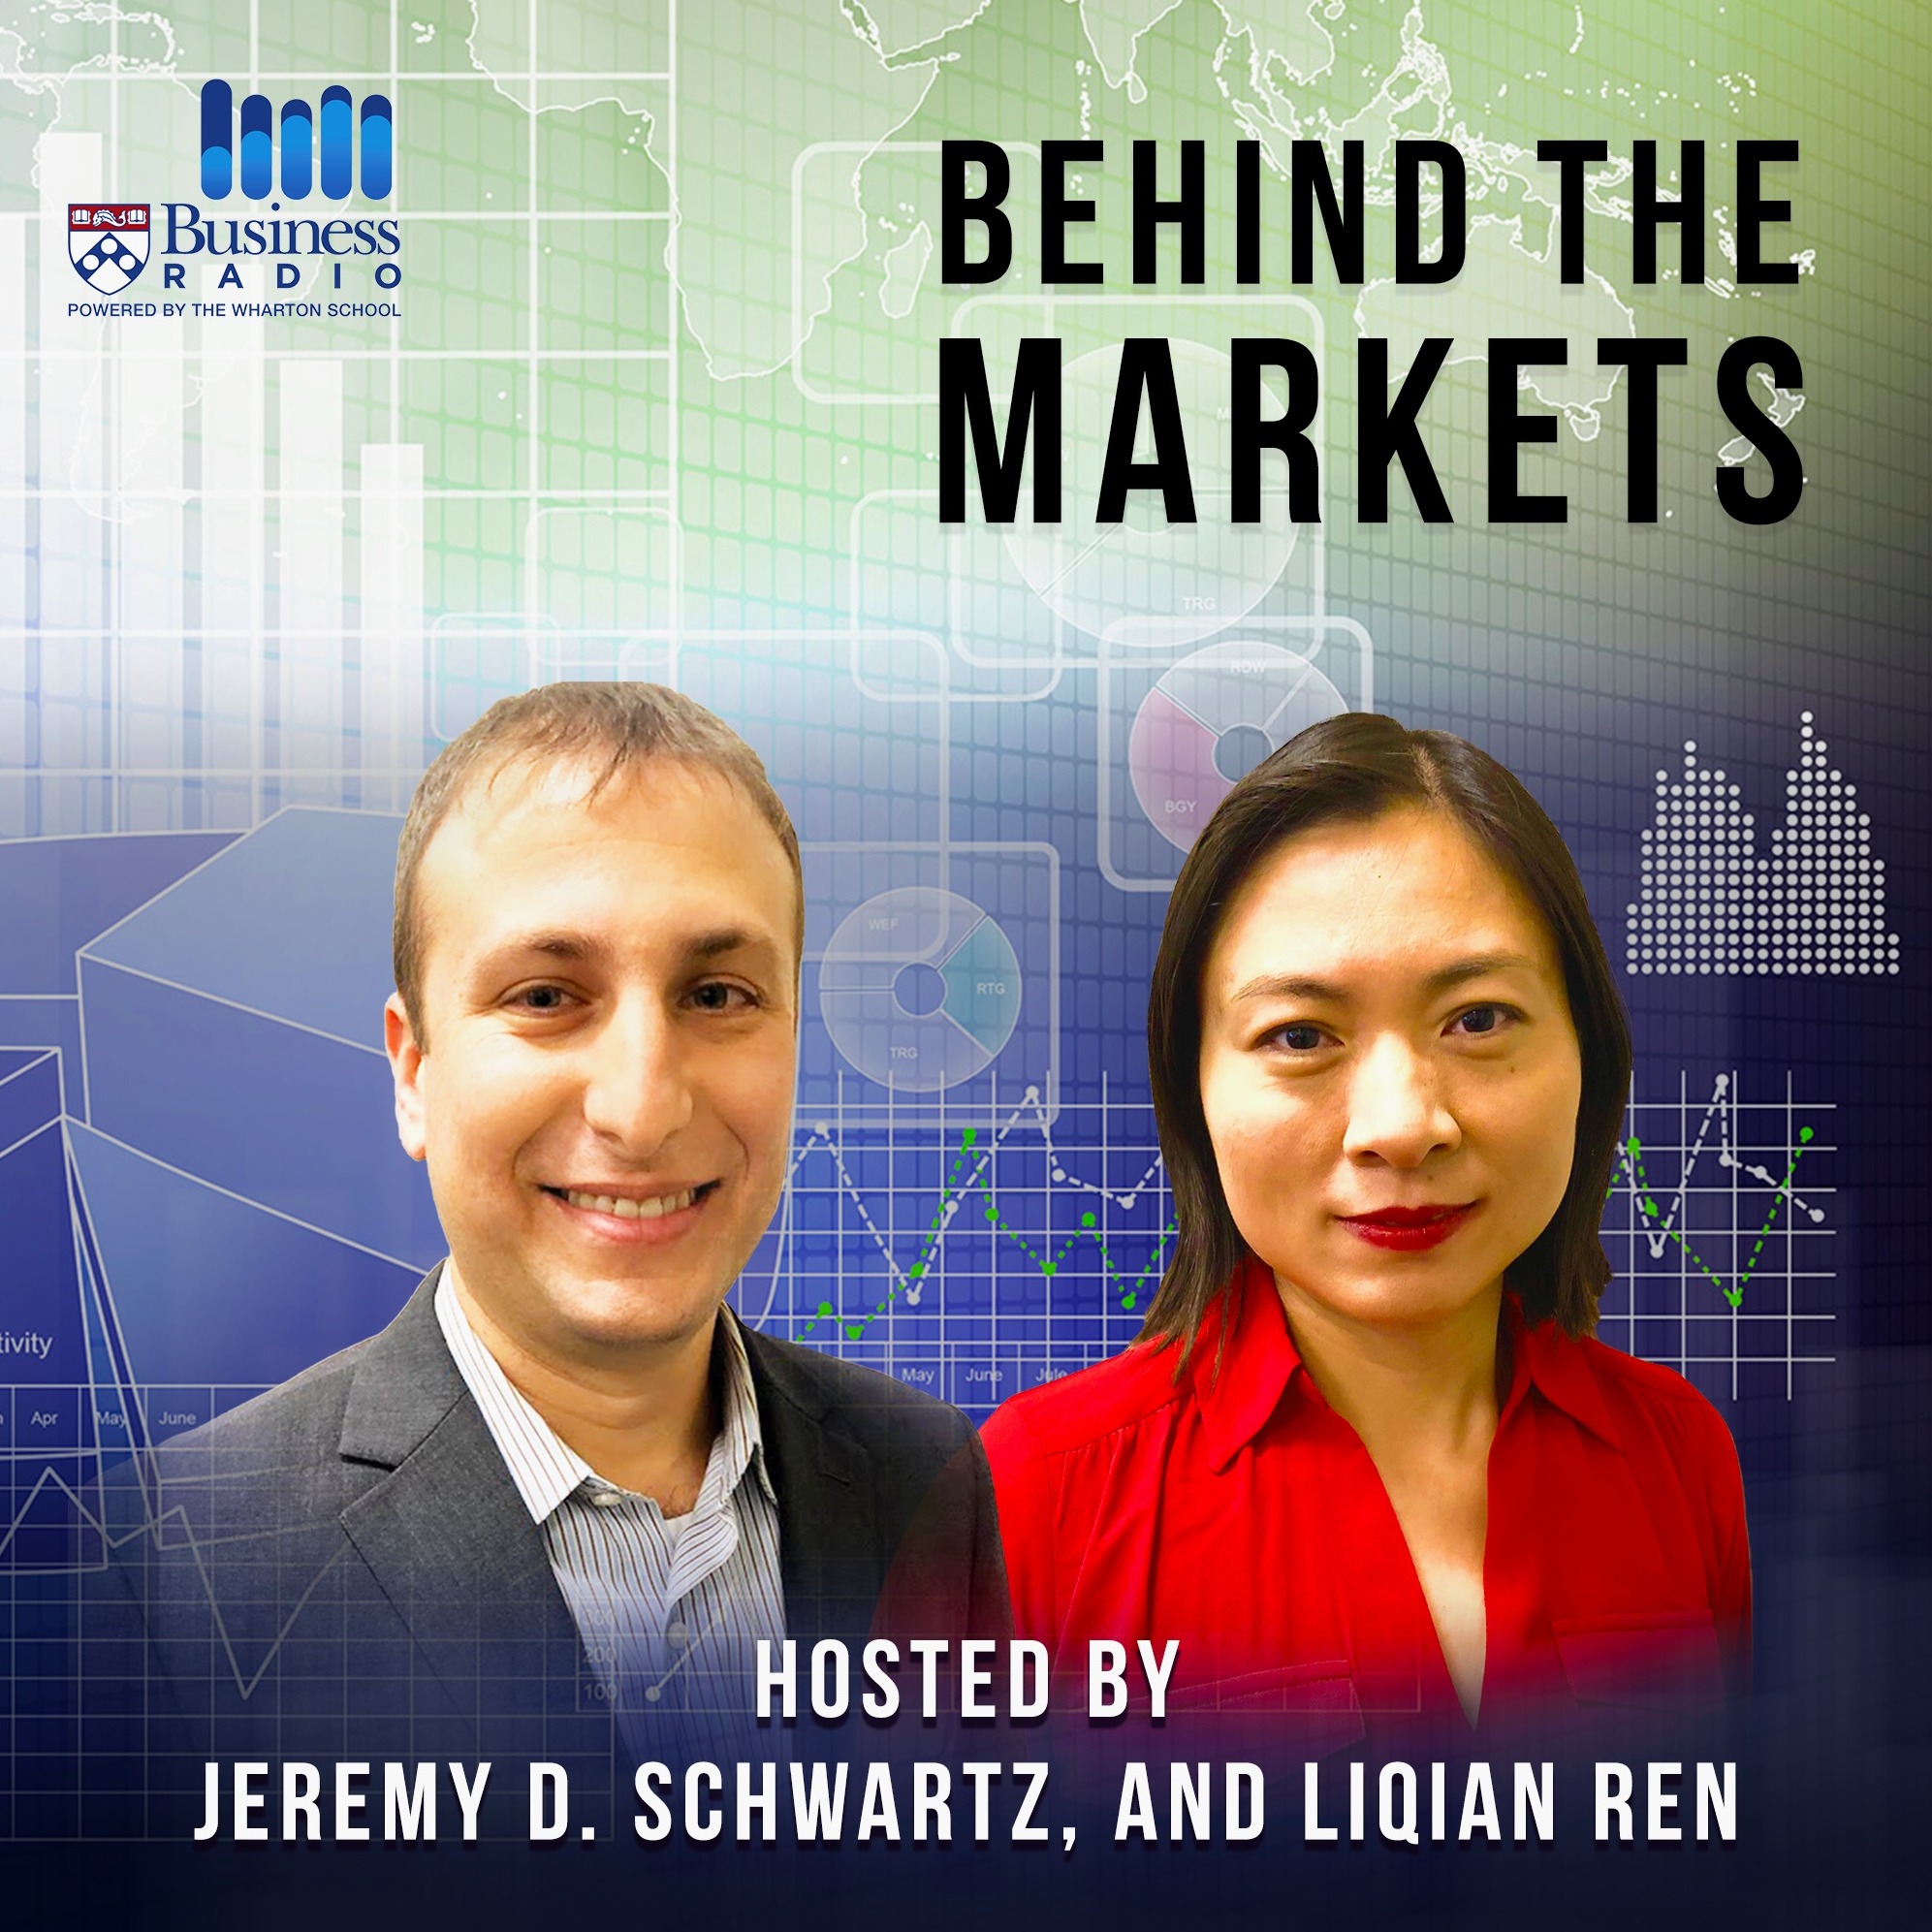 Behind the Markets Podcast: Florian Ginez, Chris King, & Tyrone Ross